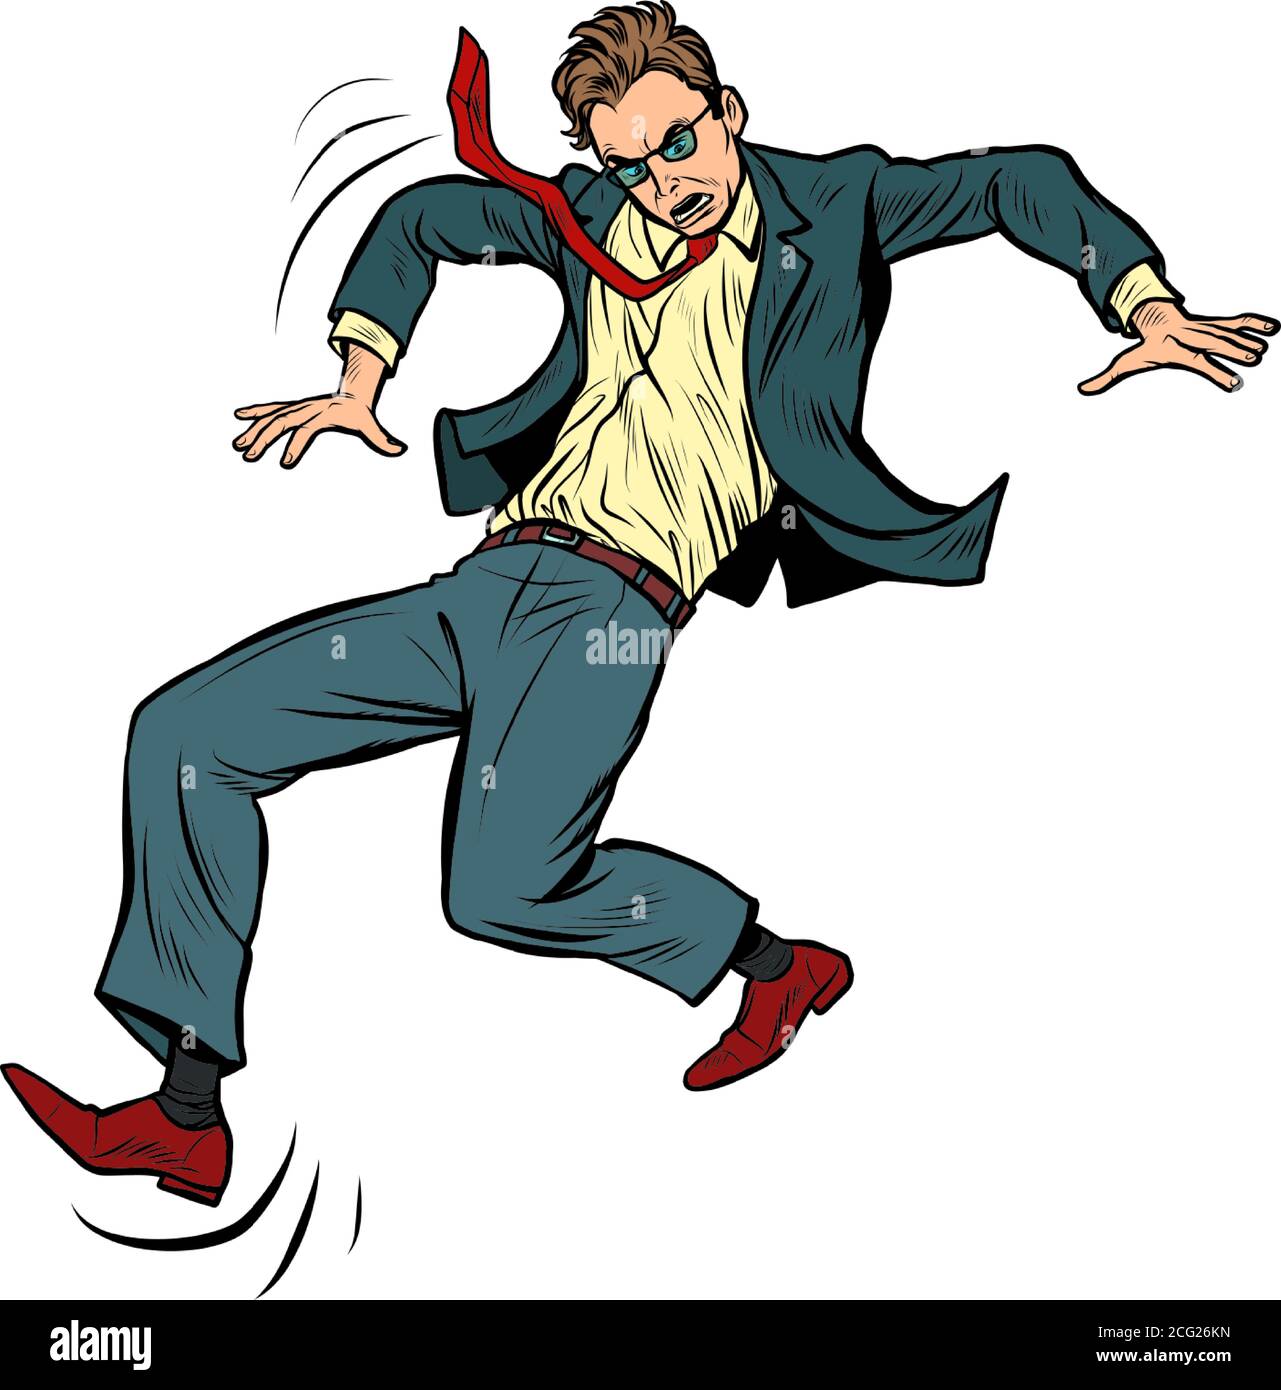 the man falls. slippery. businessman with a problem Stock Vector